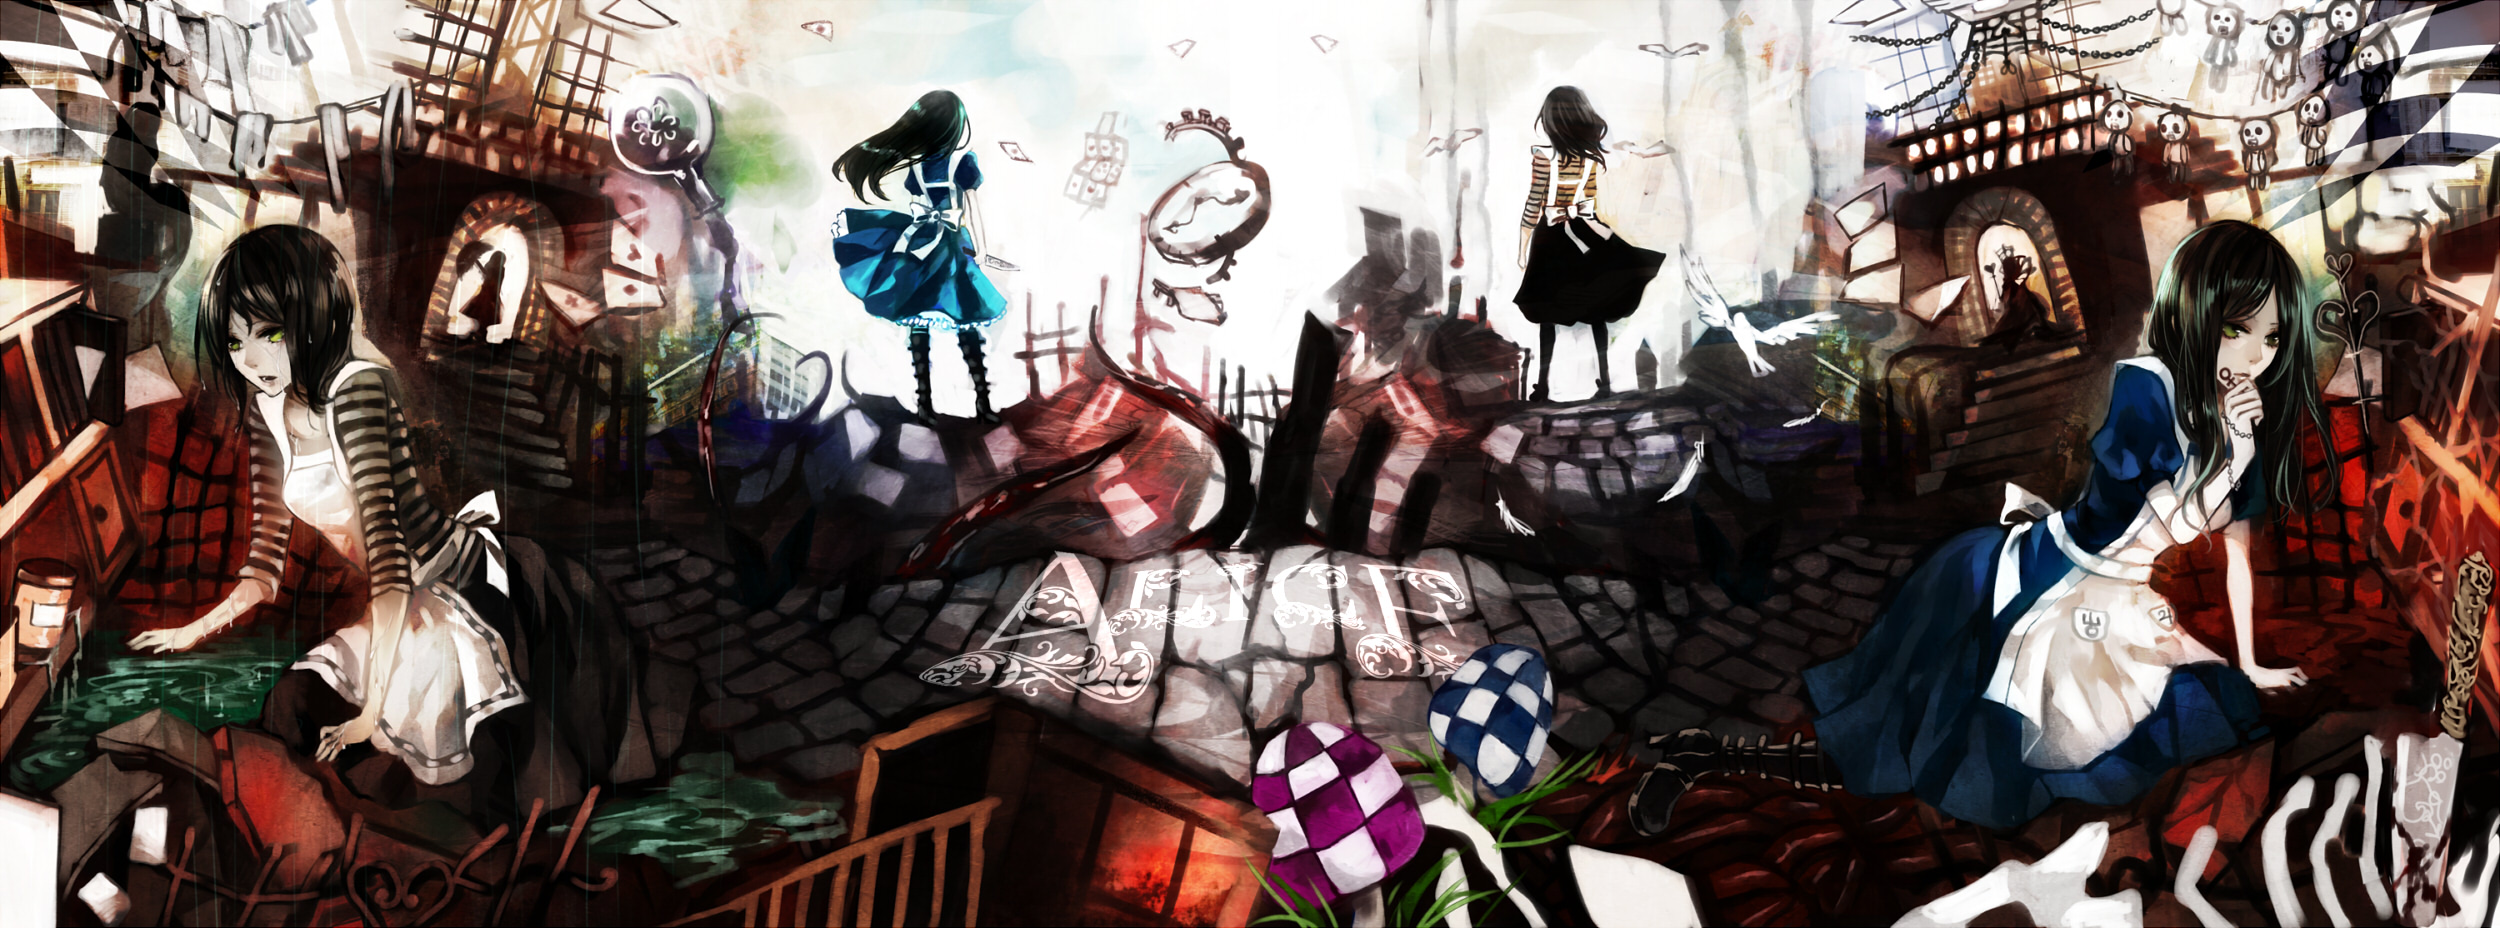 american mcgee's alice, video game, alice liddell, alice: madness returns